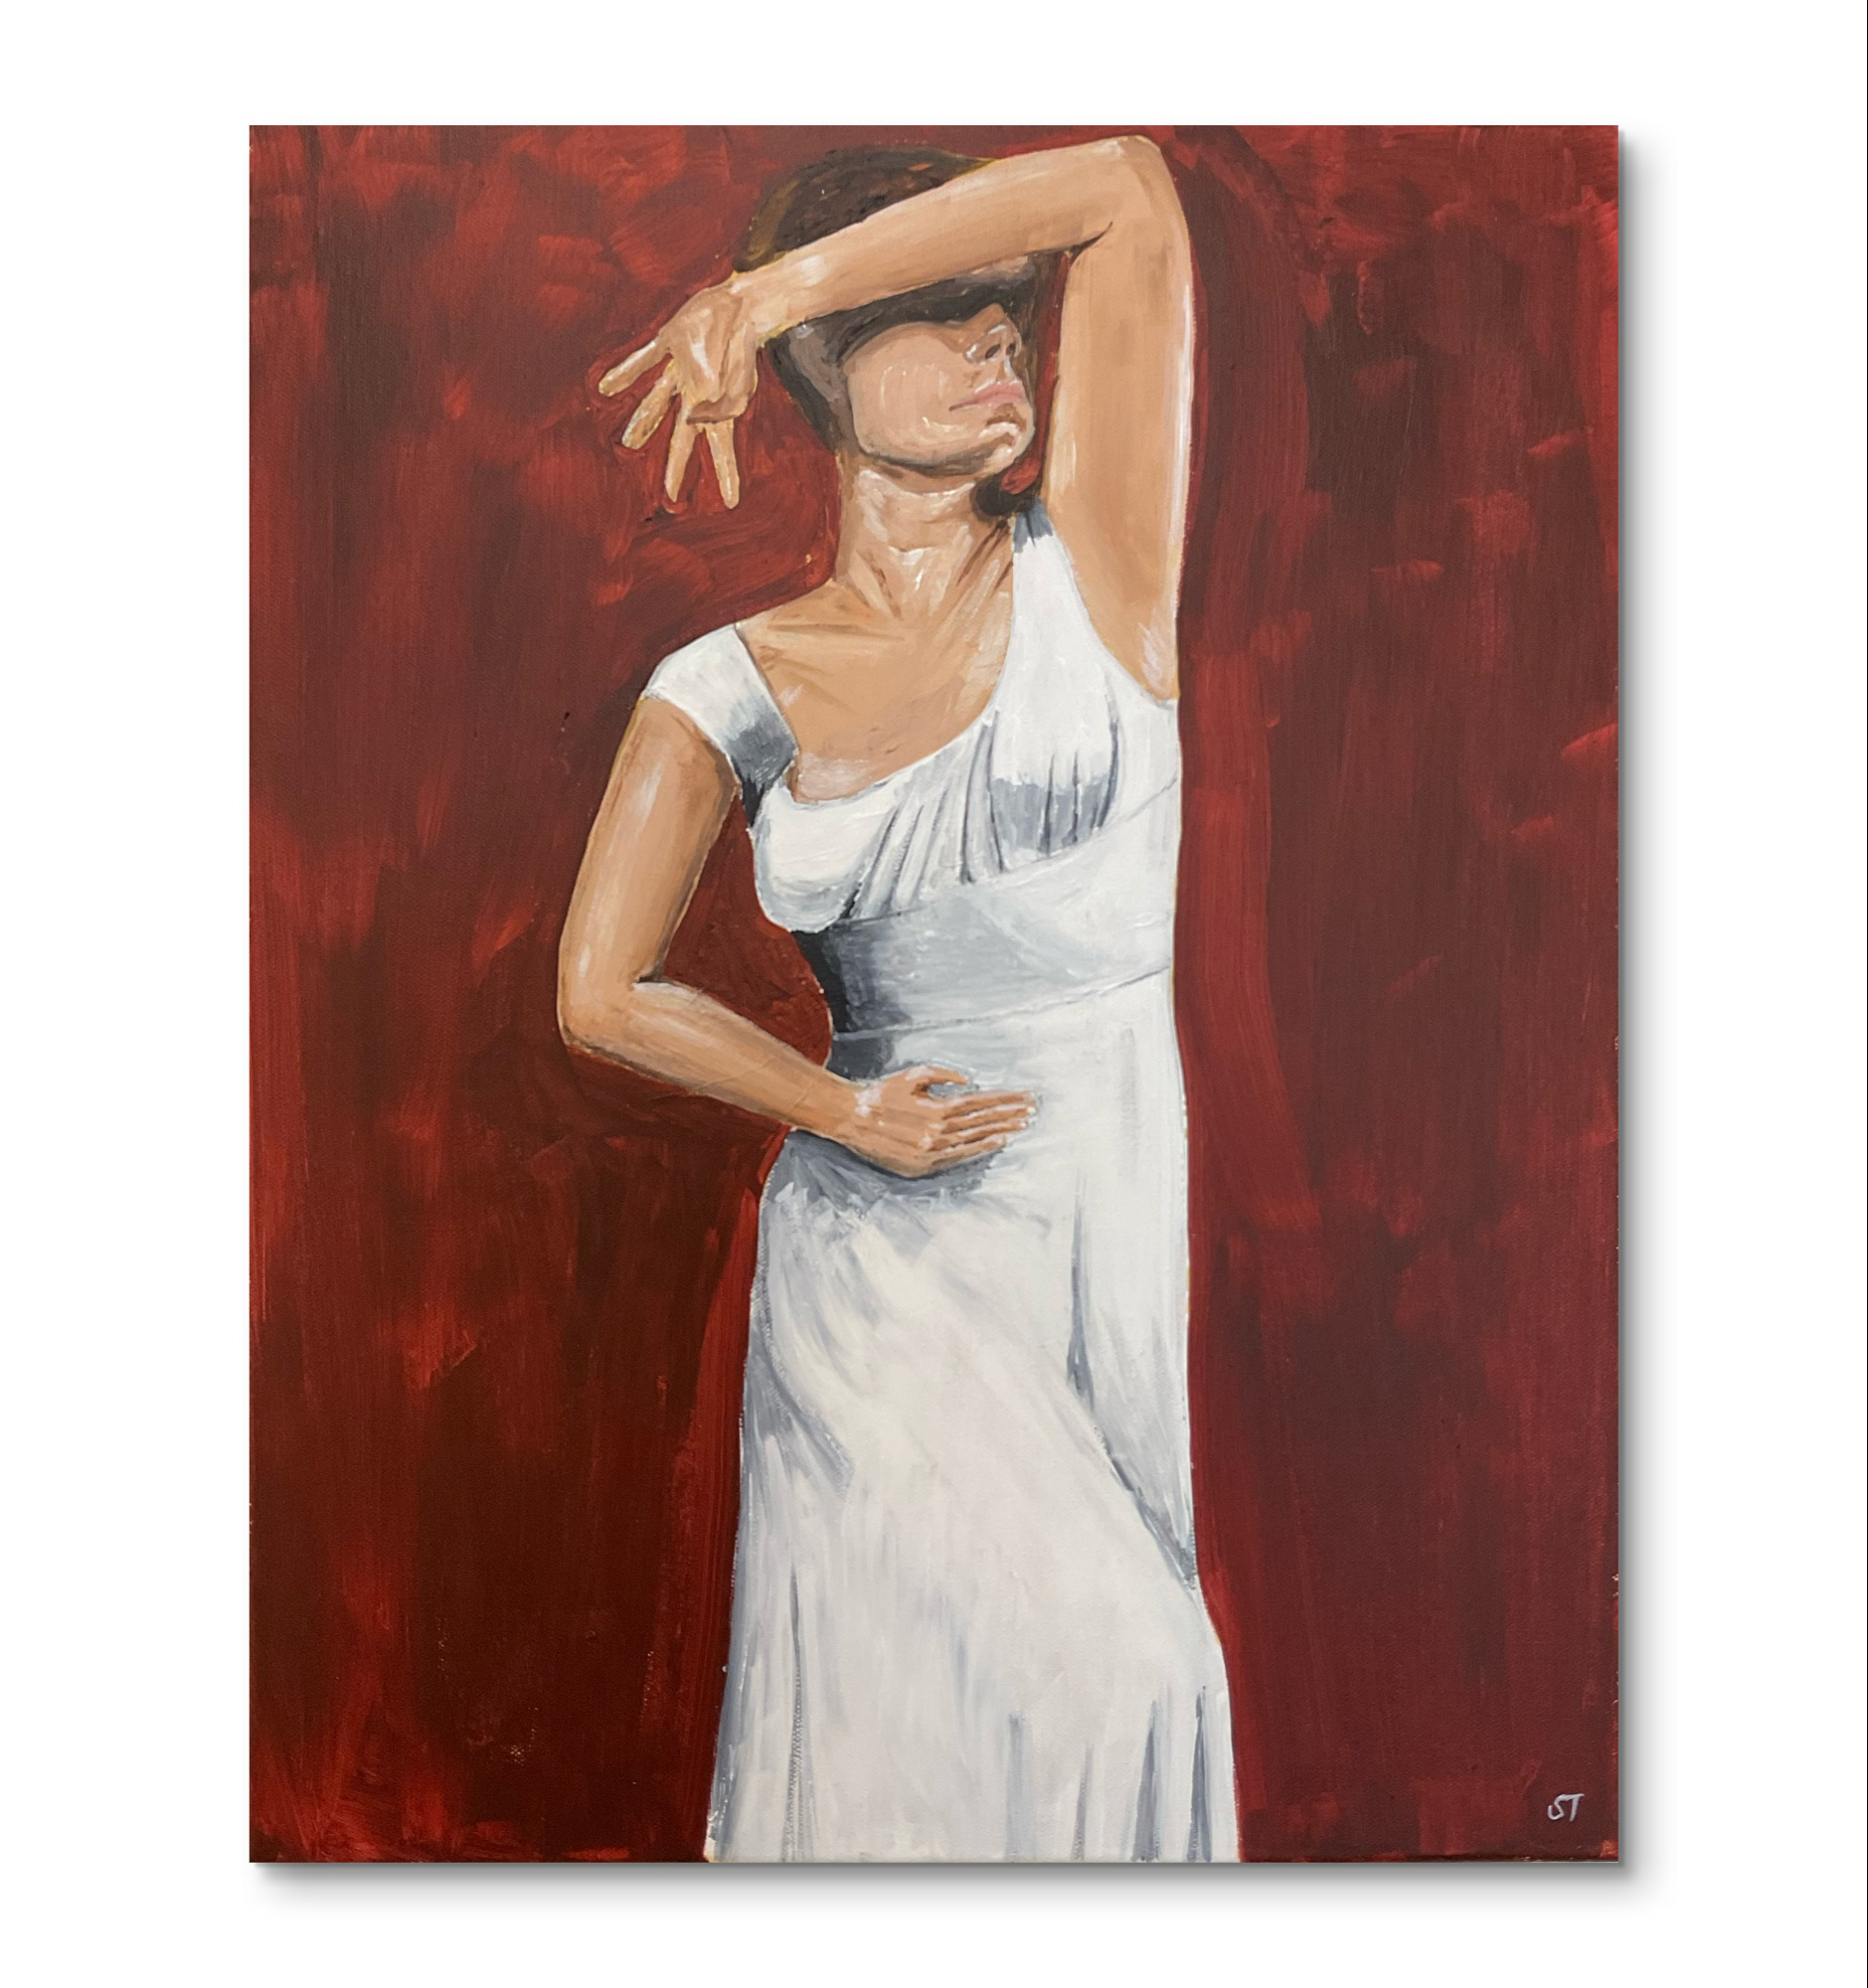 a painting of a Asian woman wearing a white dress hiding her face with her arm representing how woman often feel unseen and invisible in society